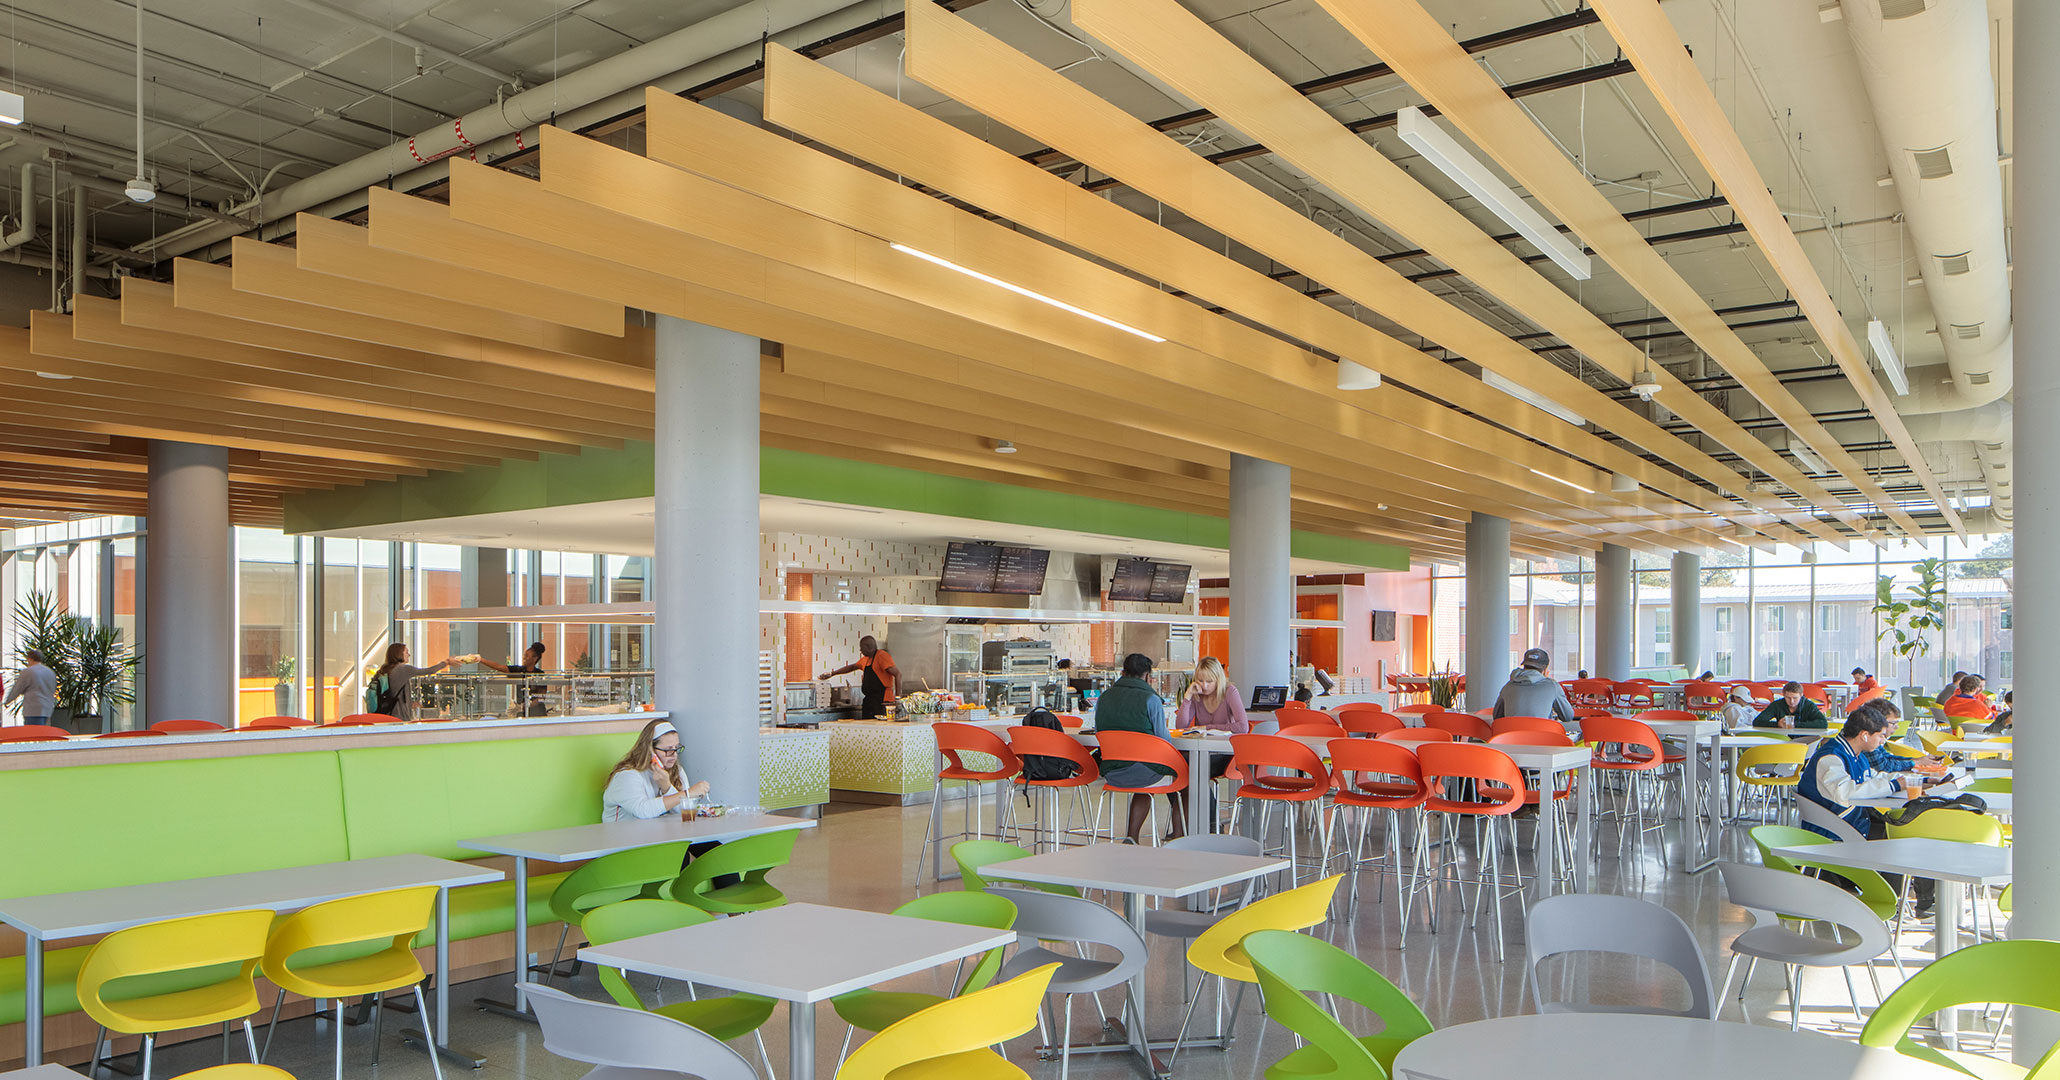 Clemson University worked with Boudreaux architects to design the café at Douthit Hills Student Hub.